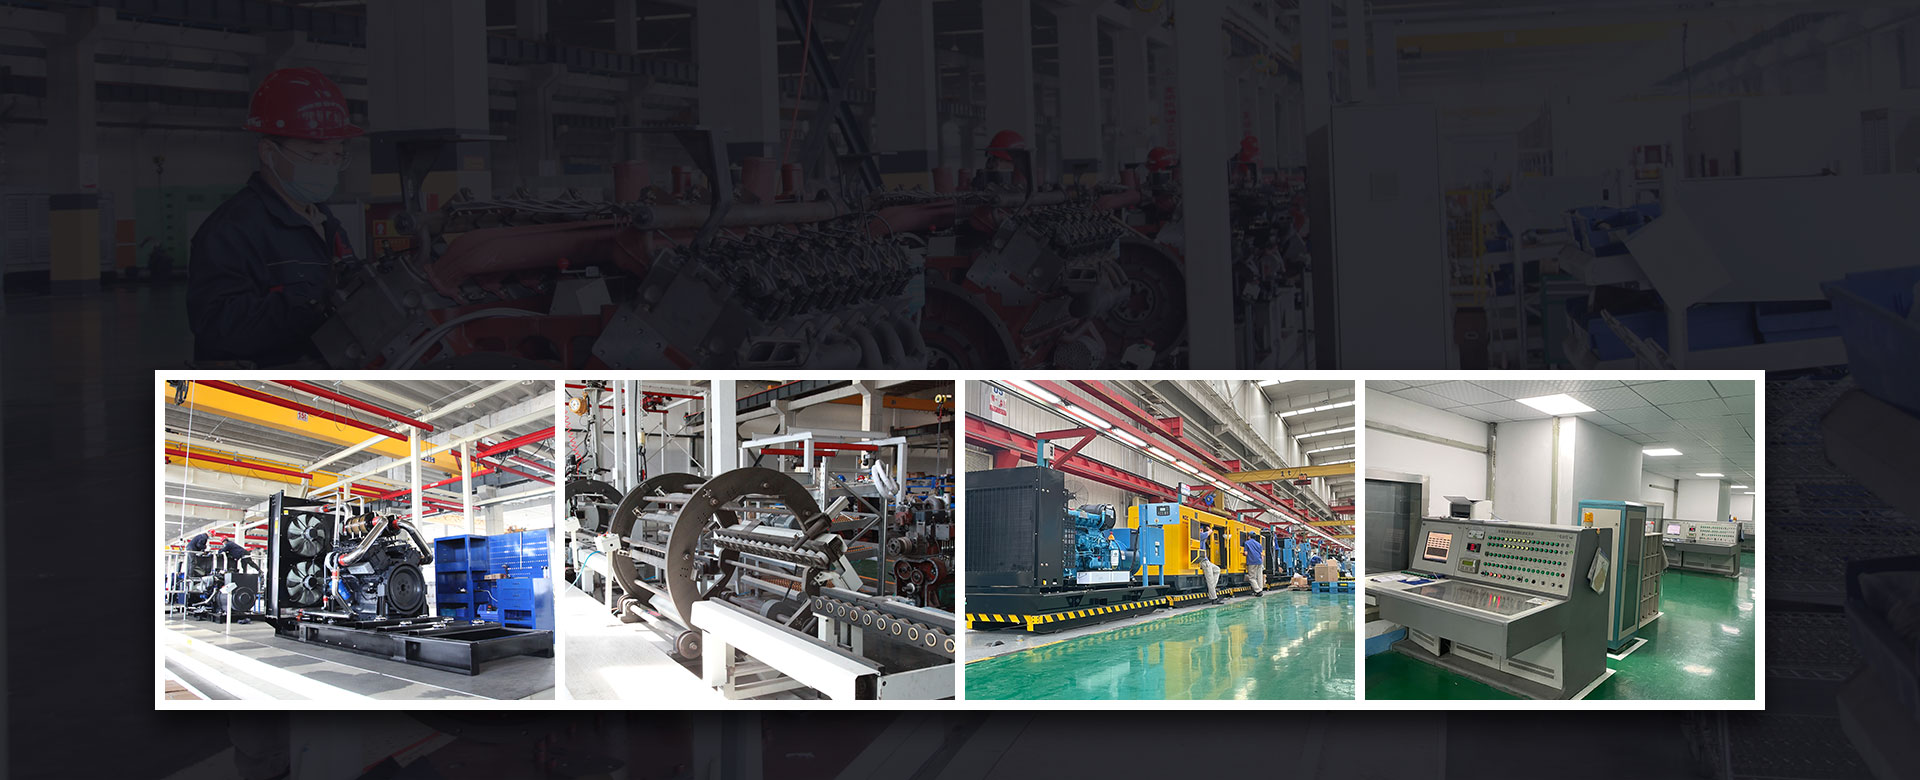 Professional Manufacturer and Seller of Power Generation Equipment